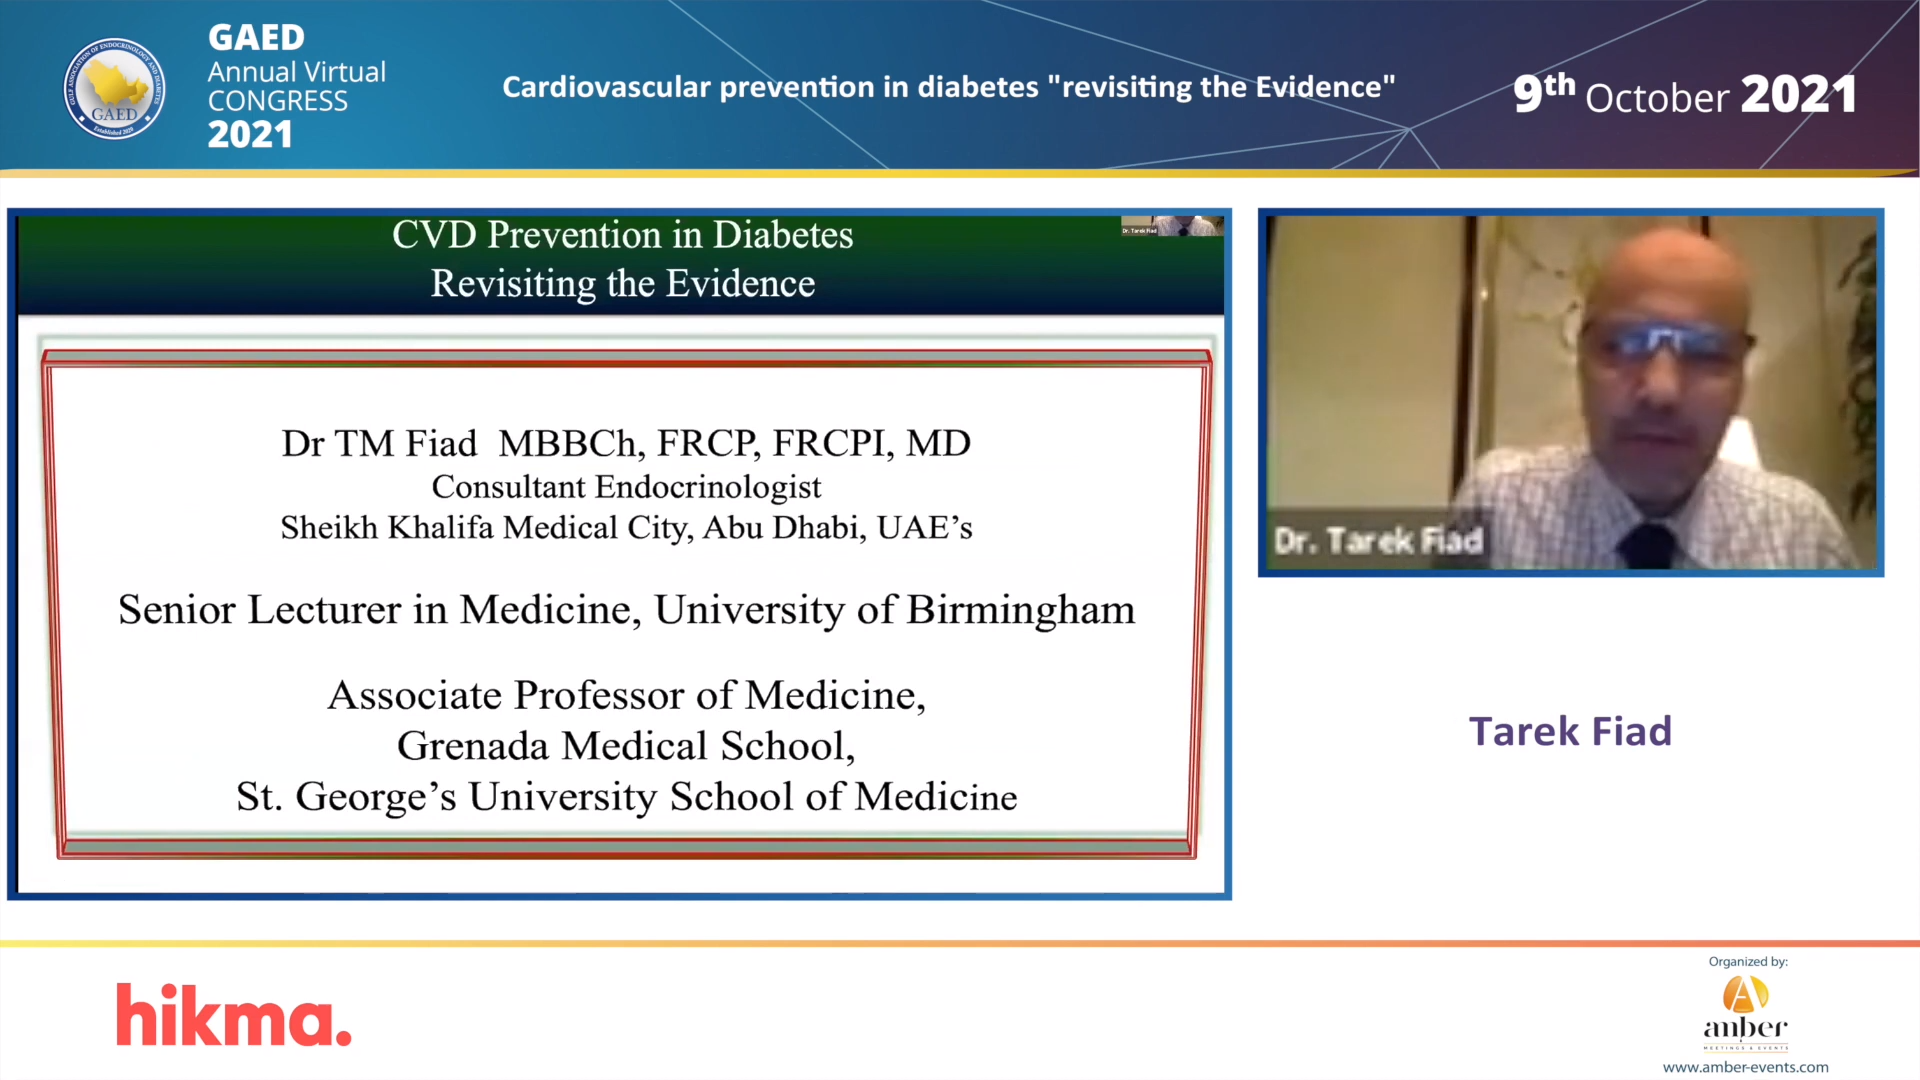 9.10.21 - Day 3, Hikma - Cardiovascular prevention in diabetes revisiting the Evidence